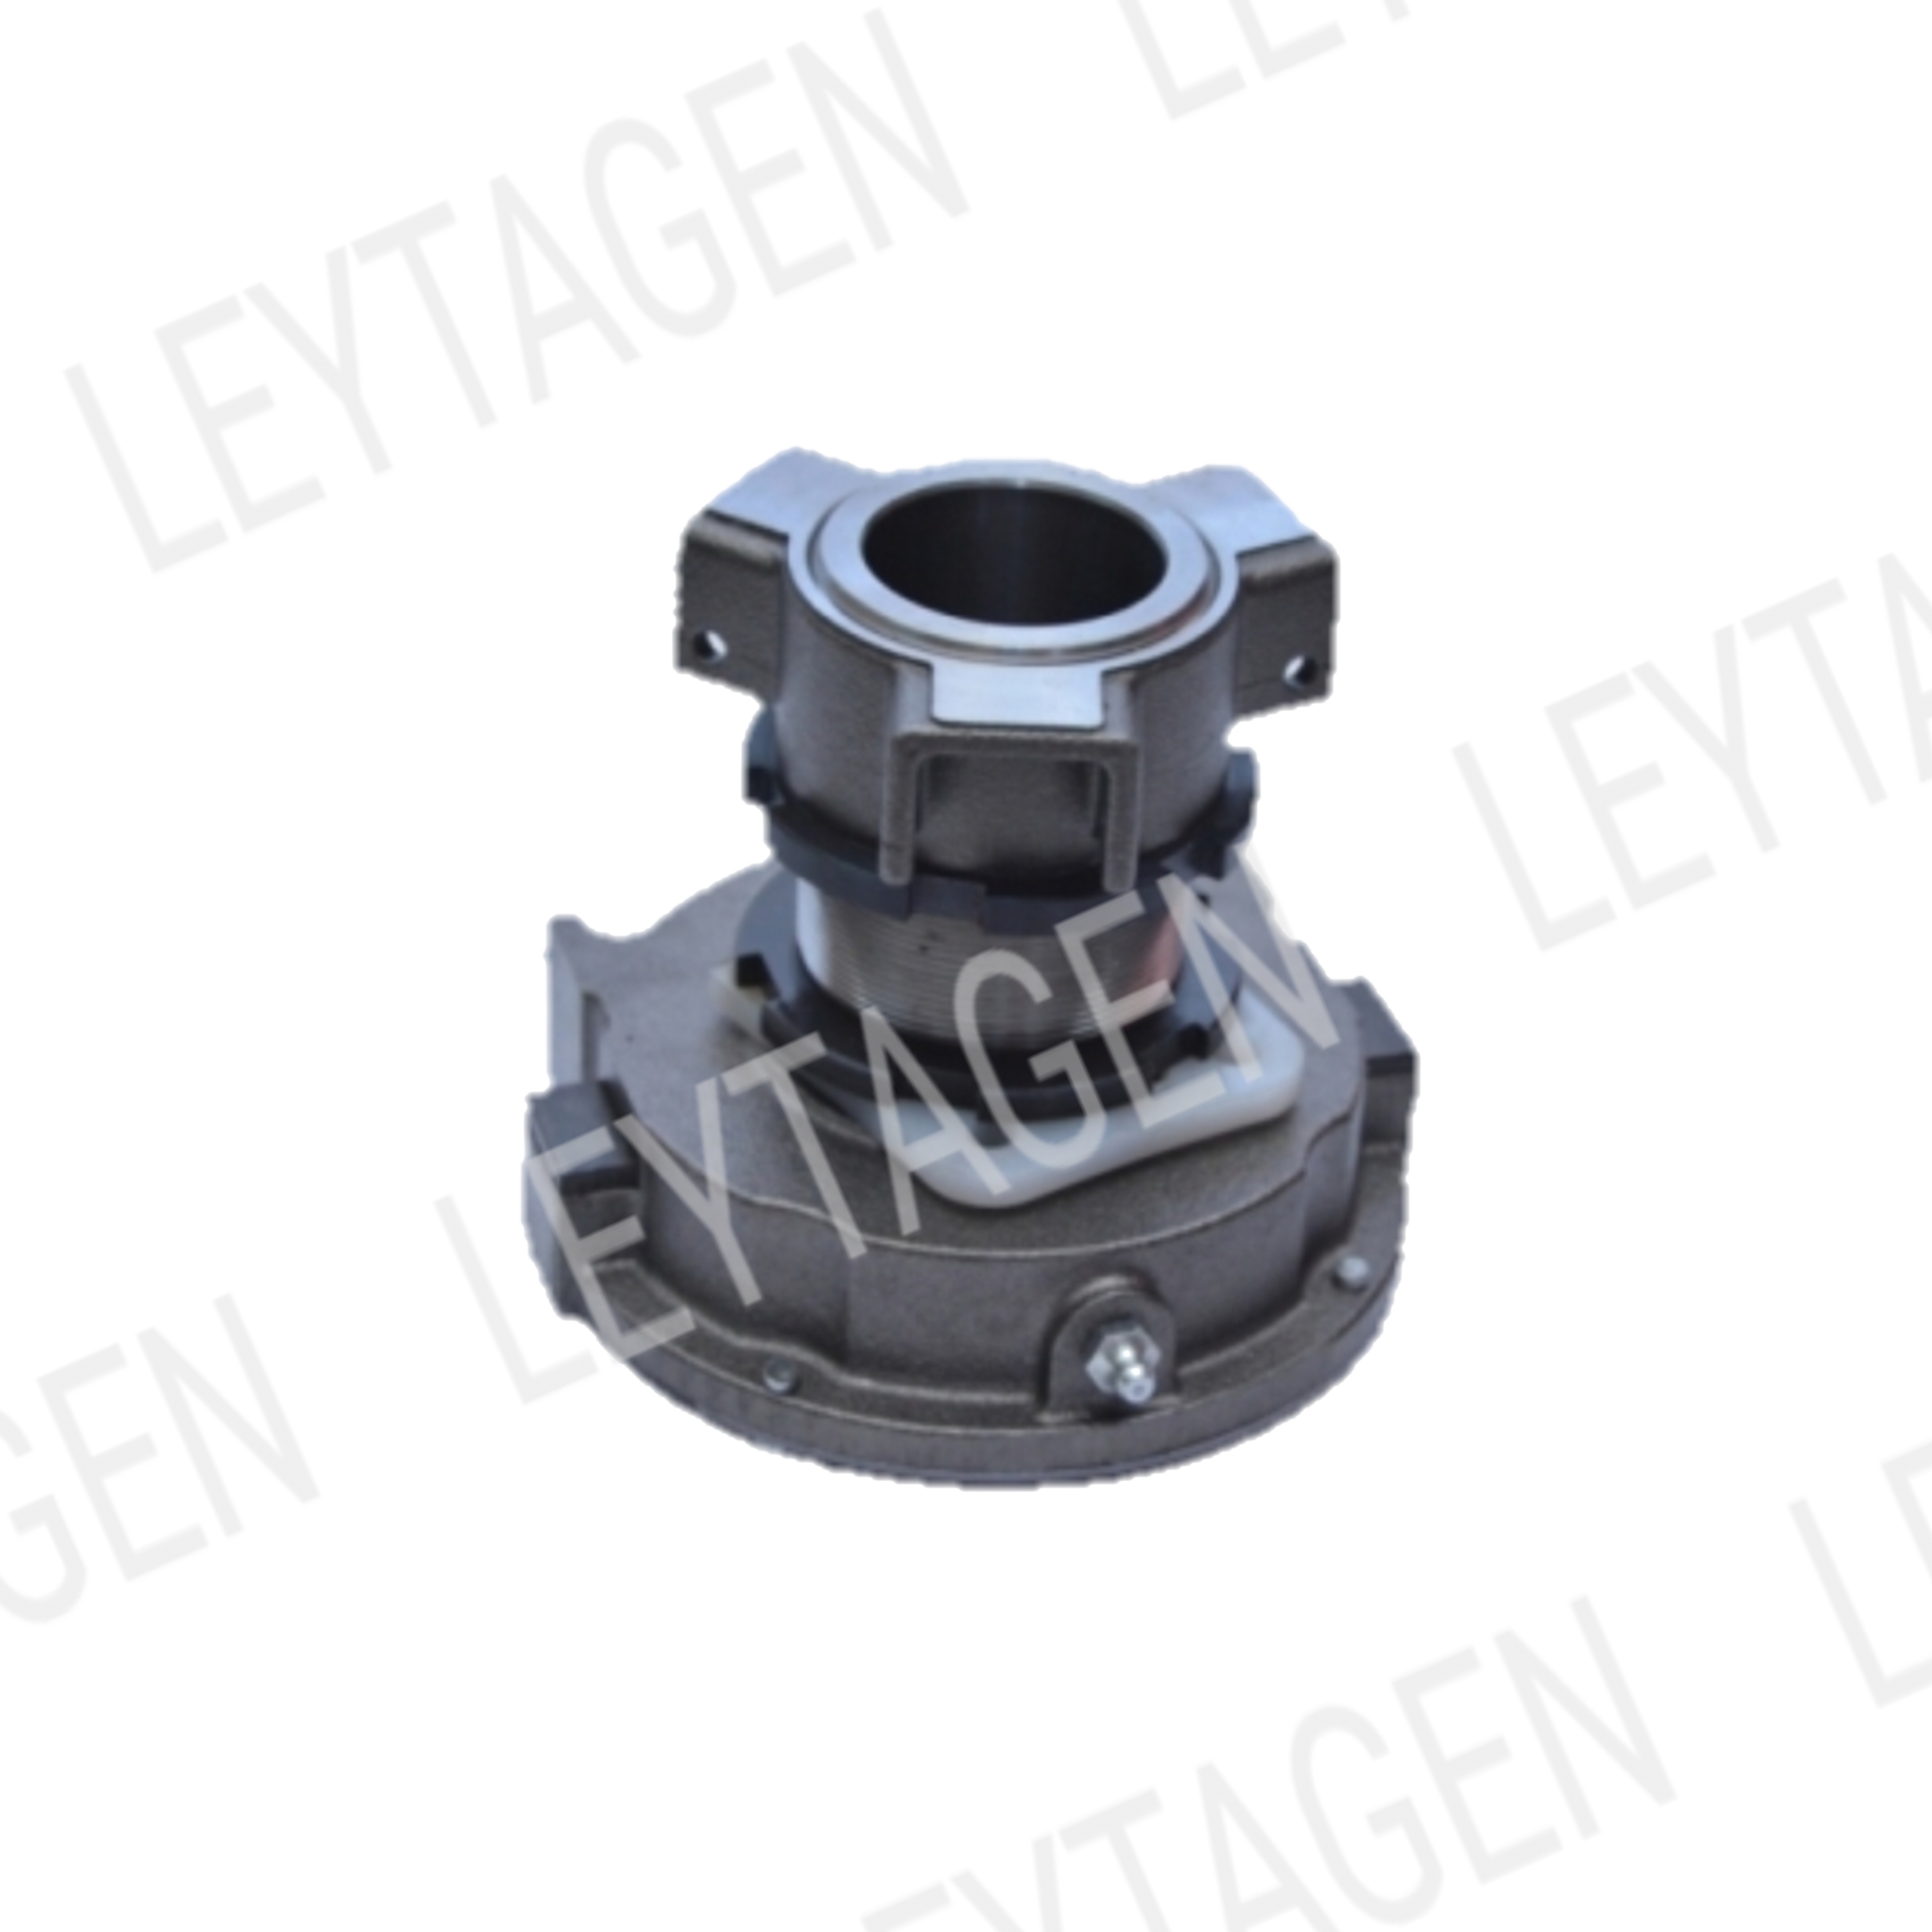 352 RELEASE BEARING (PULL) (LG/RLB352/CH/035)